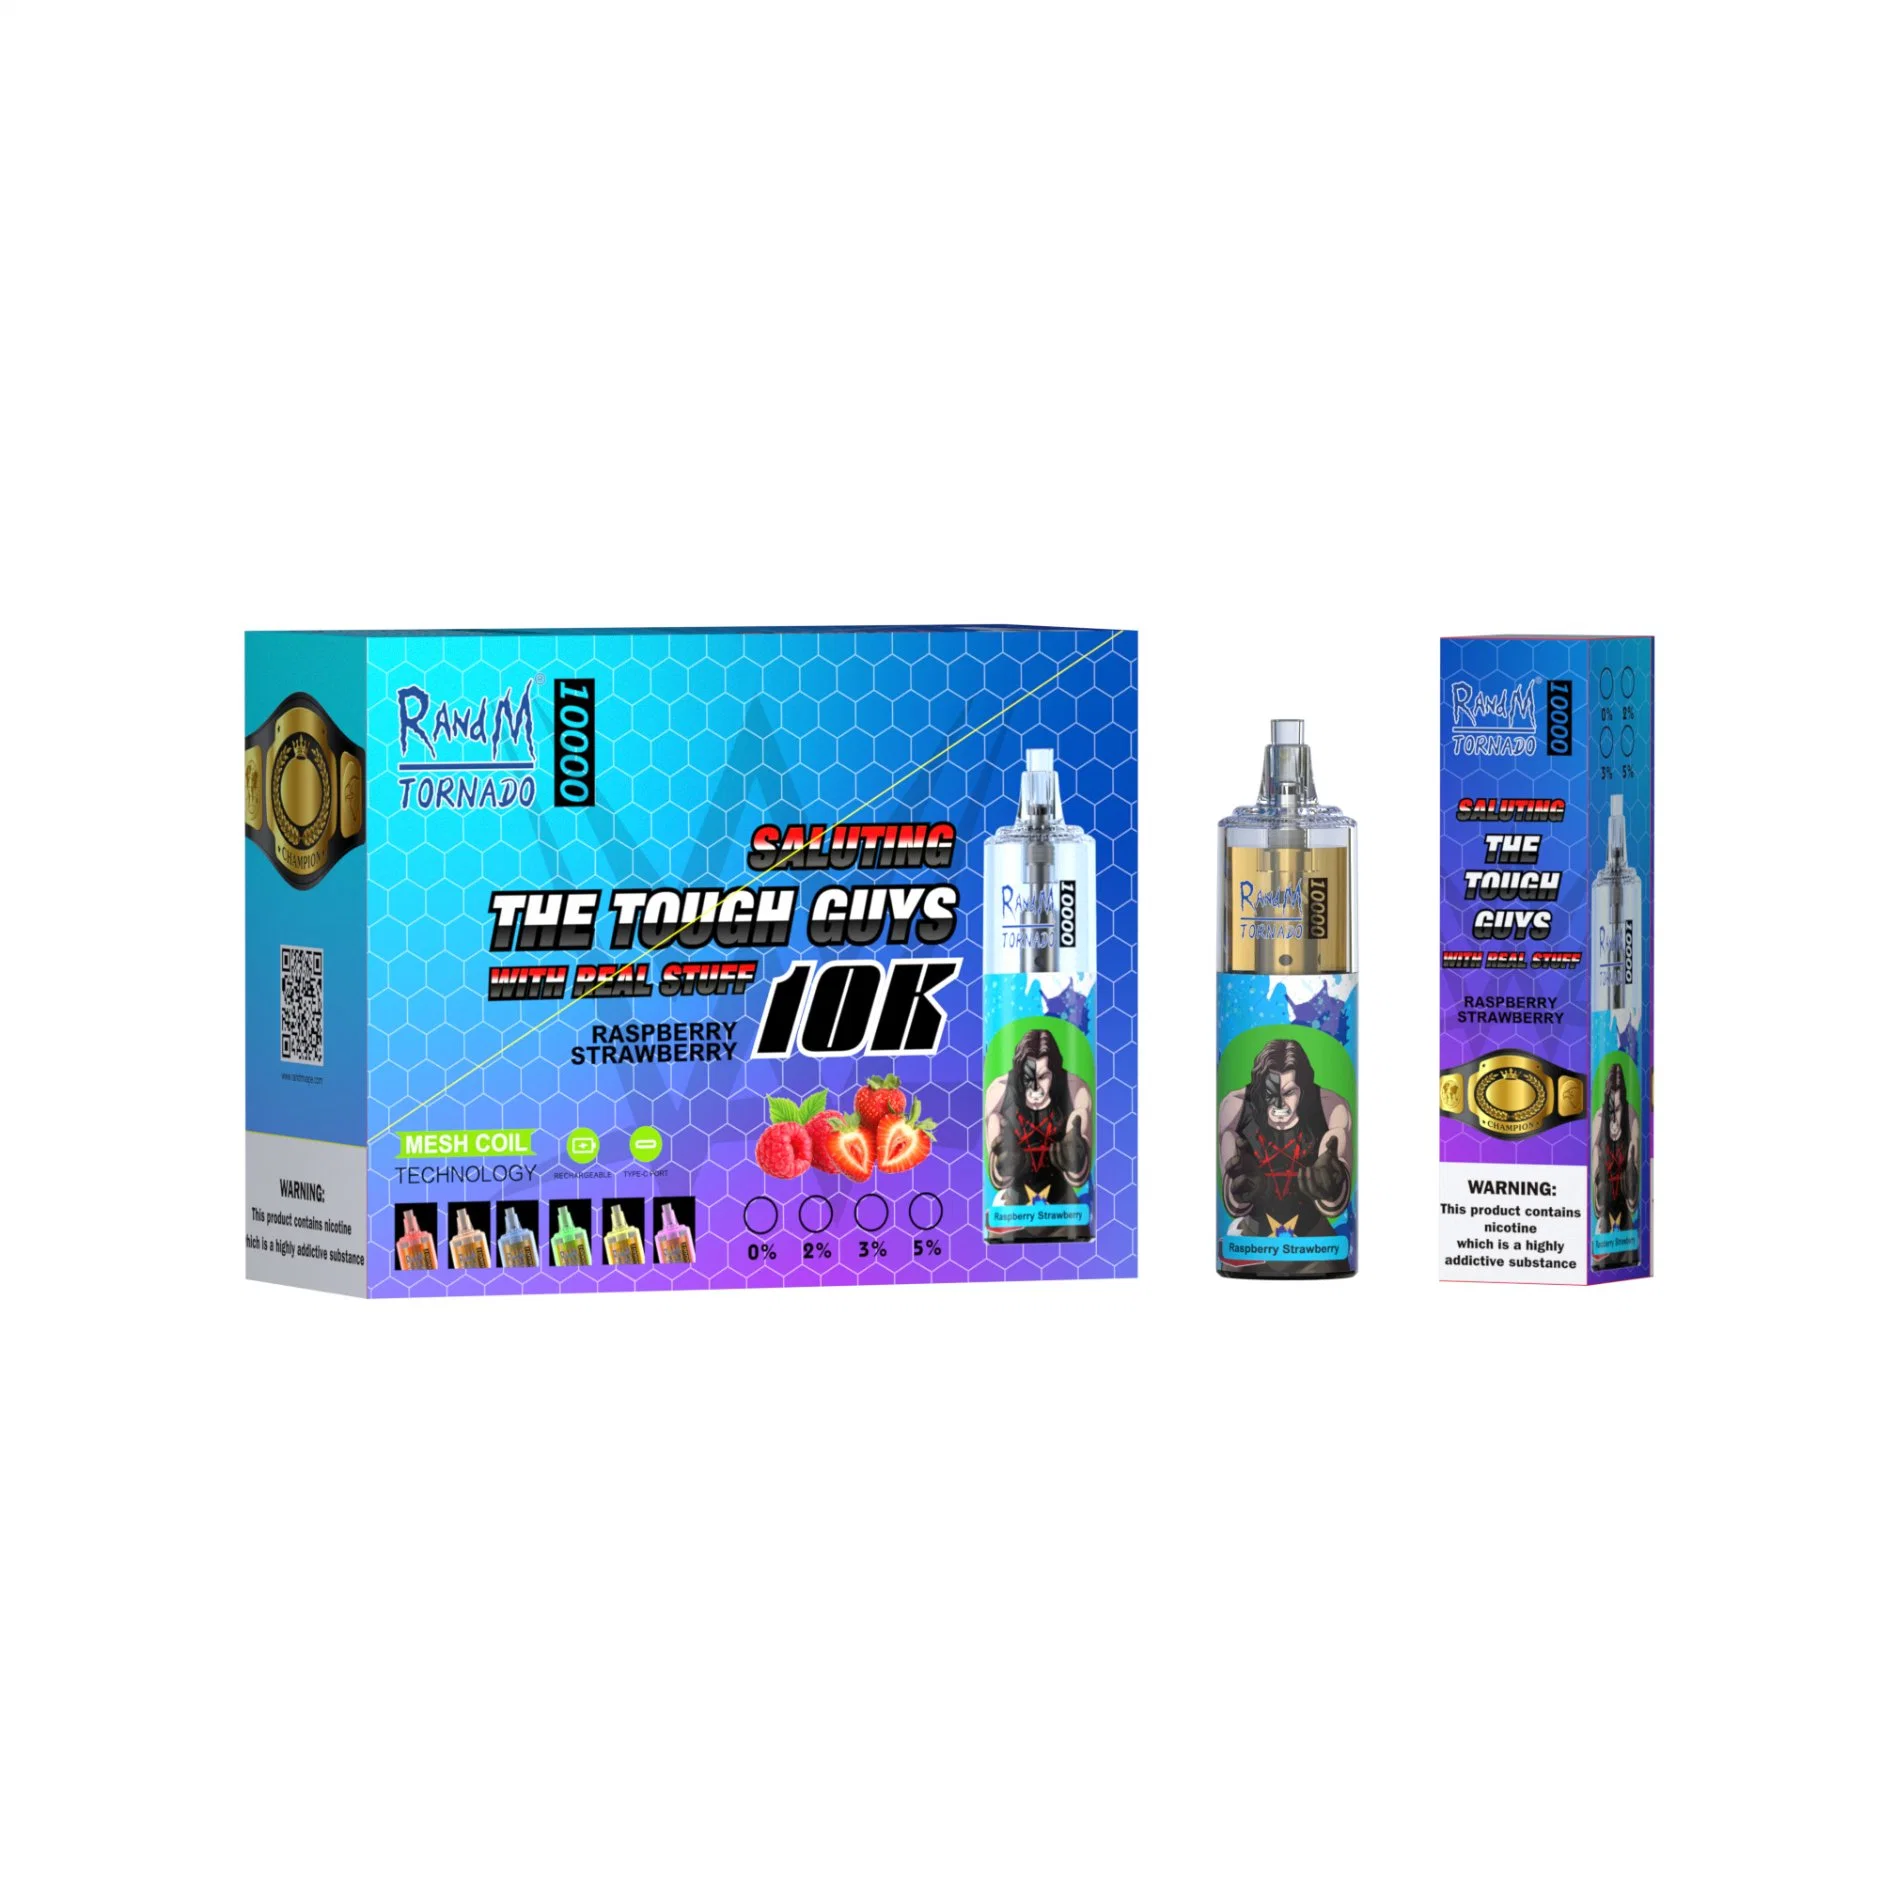 Factory Price Randm Tornado 10000 Puffs with Rbg Lights E Cigarette Disposable/Chargeable Vape Pen